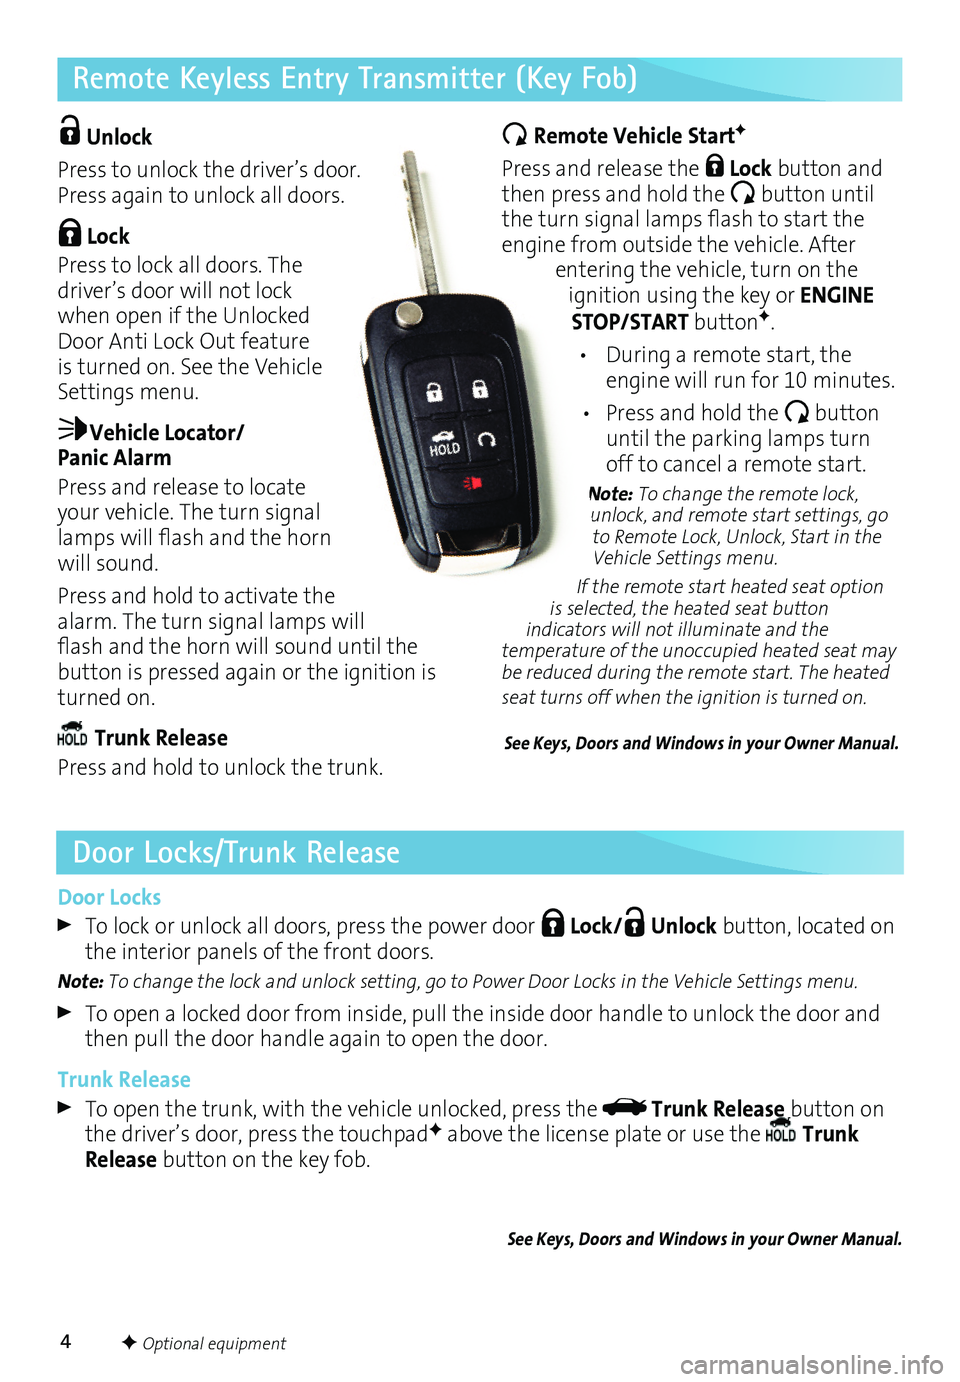 BUICK LACROSSE 2016  Get To Know Guide 4
Remote Keyless Entry Transmitter (Key Fob) 
 Unlock 
Press to unlock the driver’s door. Press again to unlock all doors.
 Lock
Press to lock all doors. The driver’s door will not lock when open 